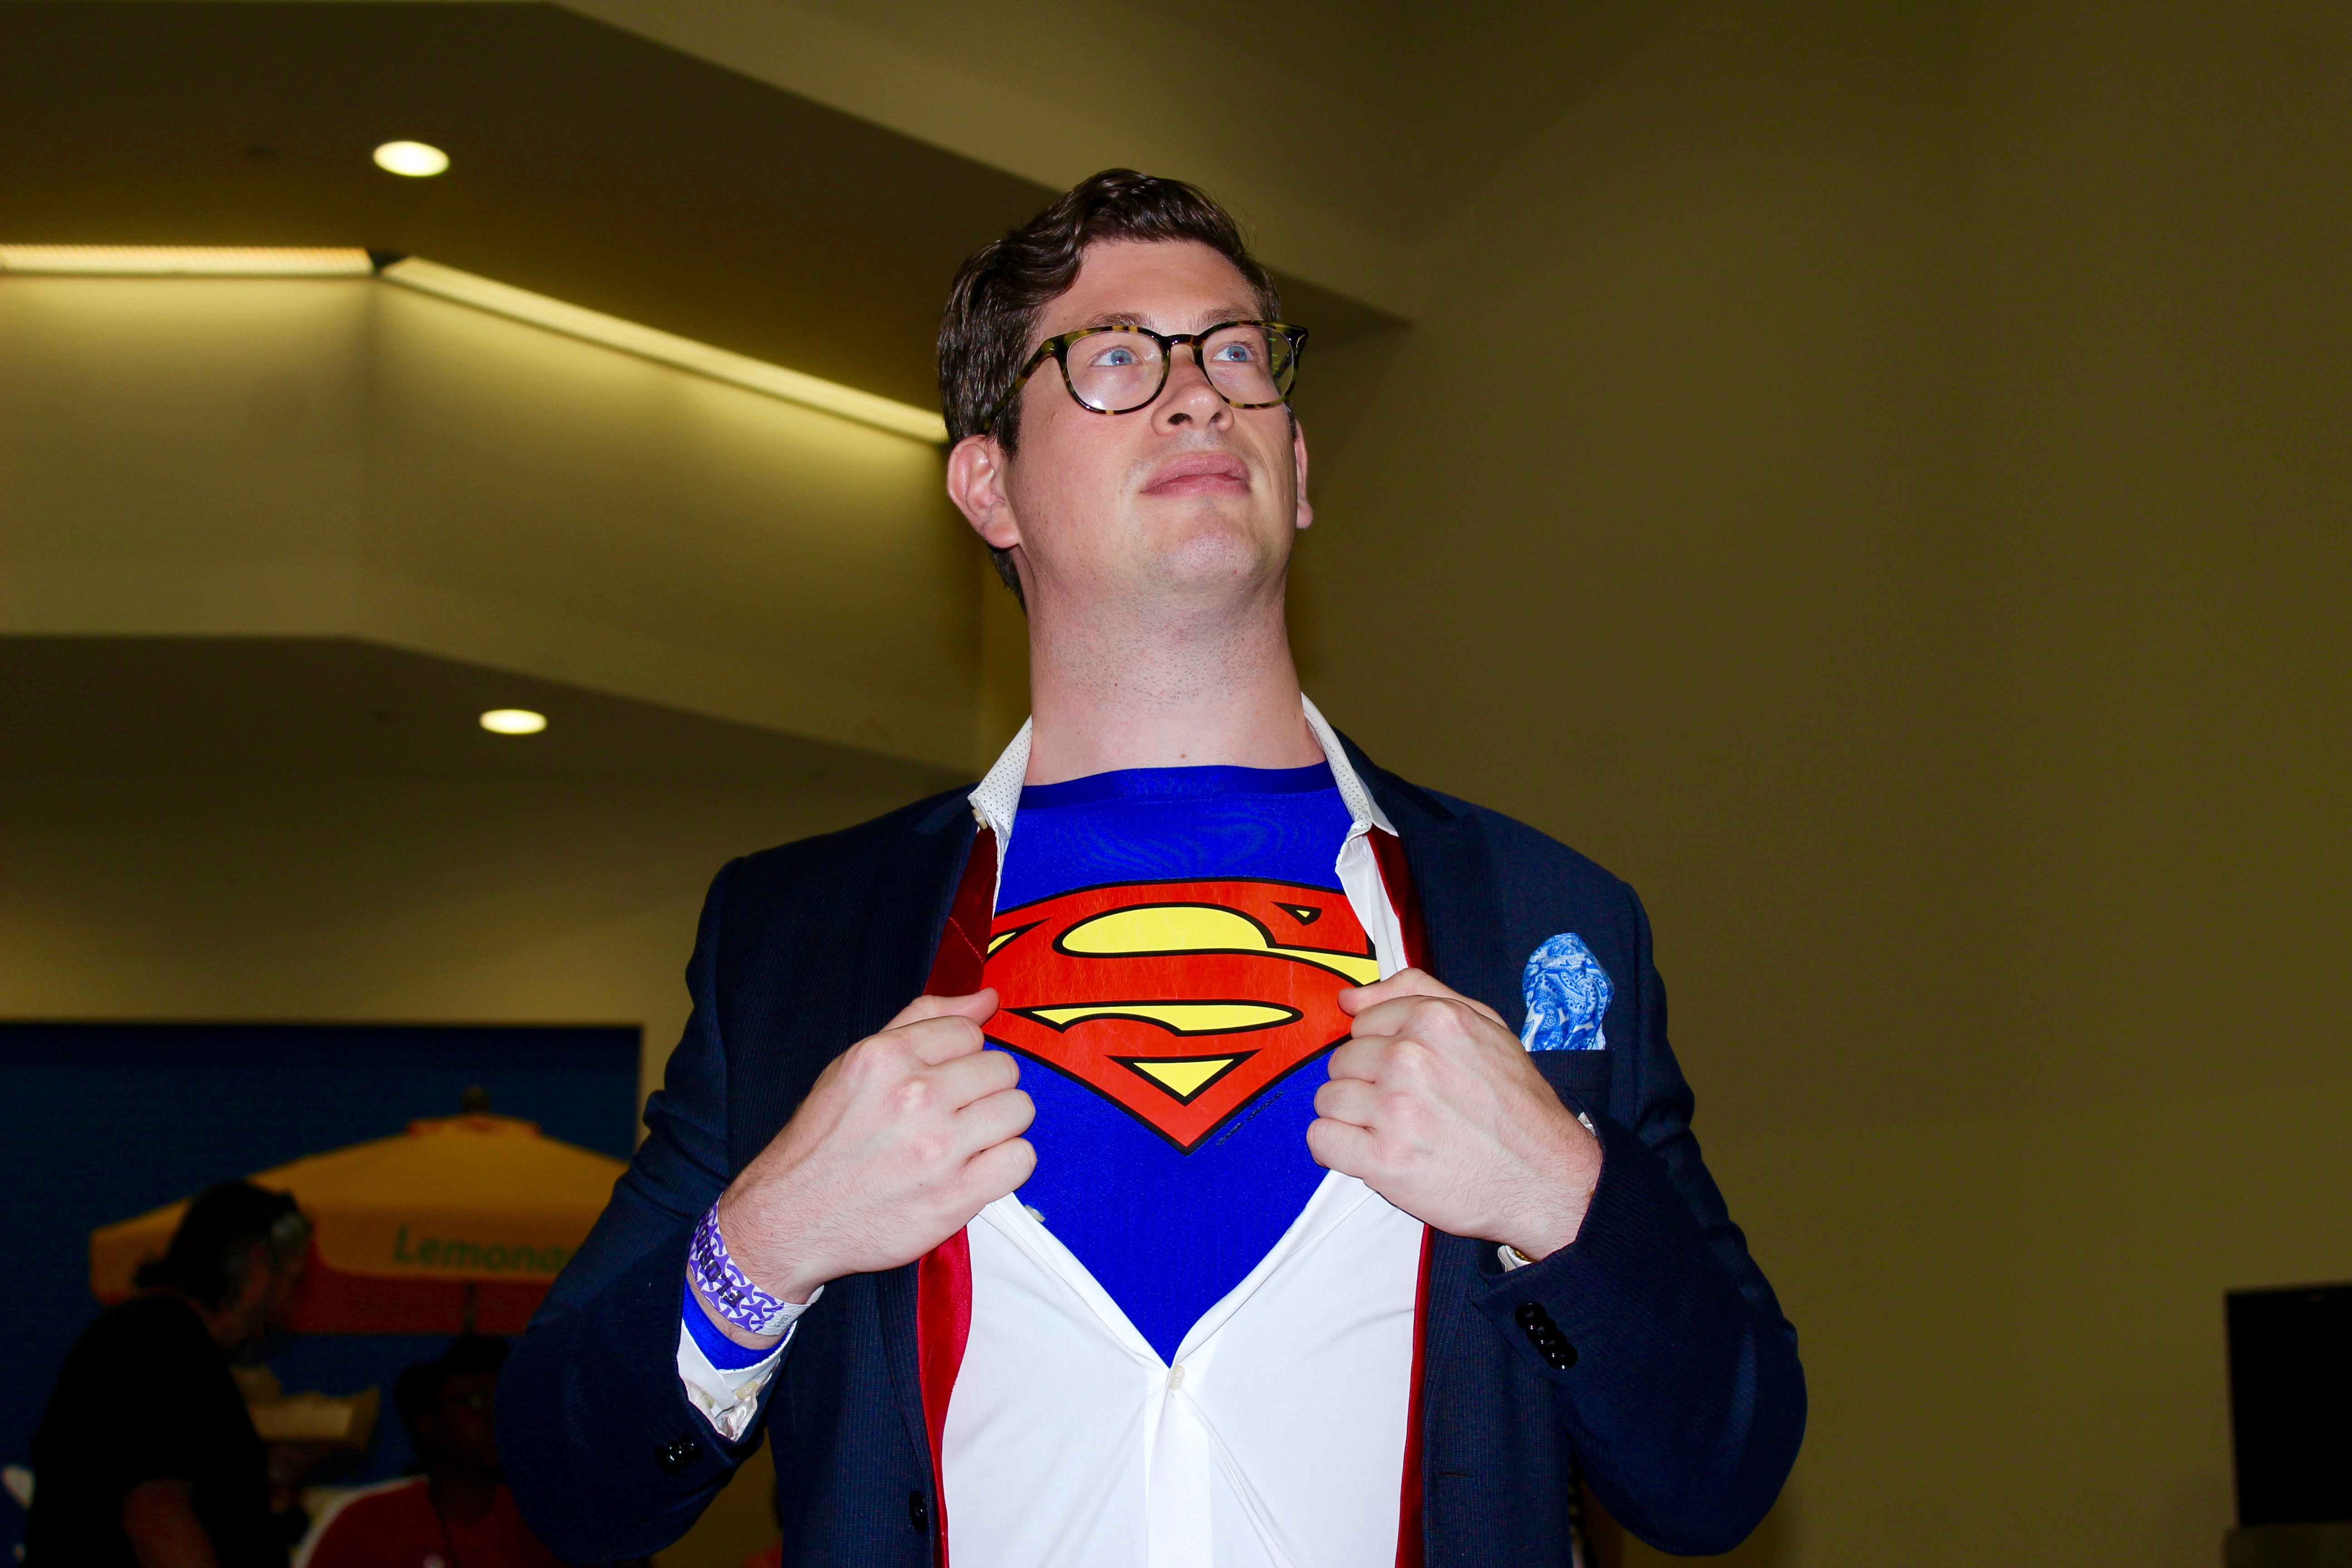 A cosplayer dressed as Clark Kent/Superman.